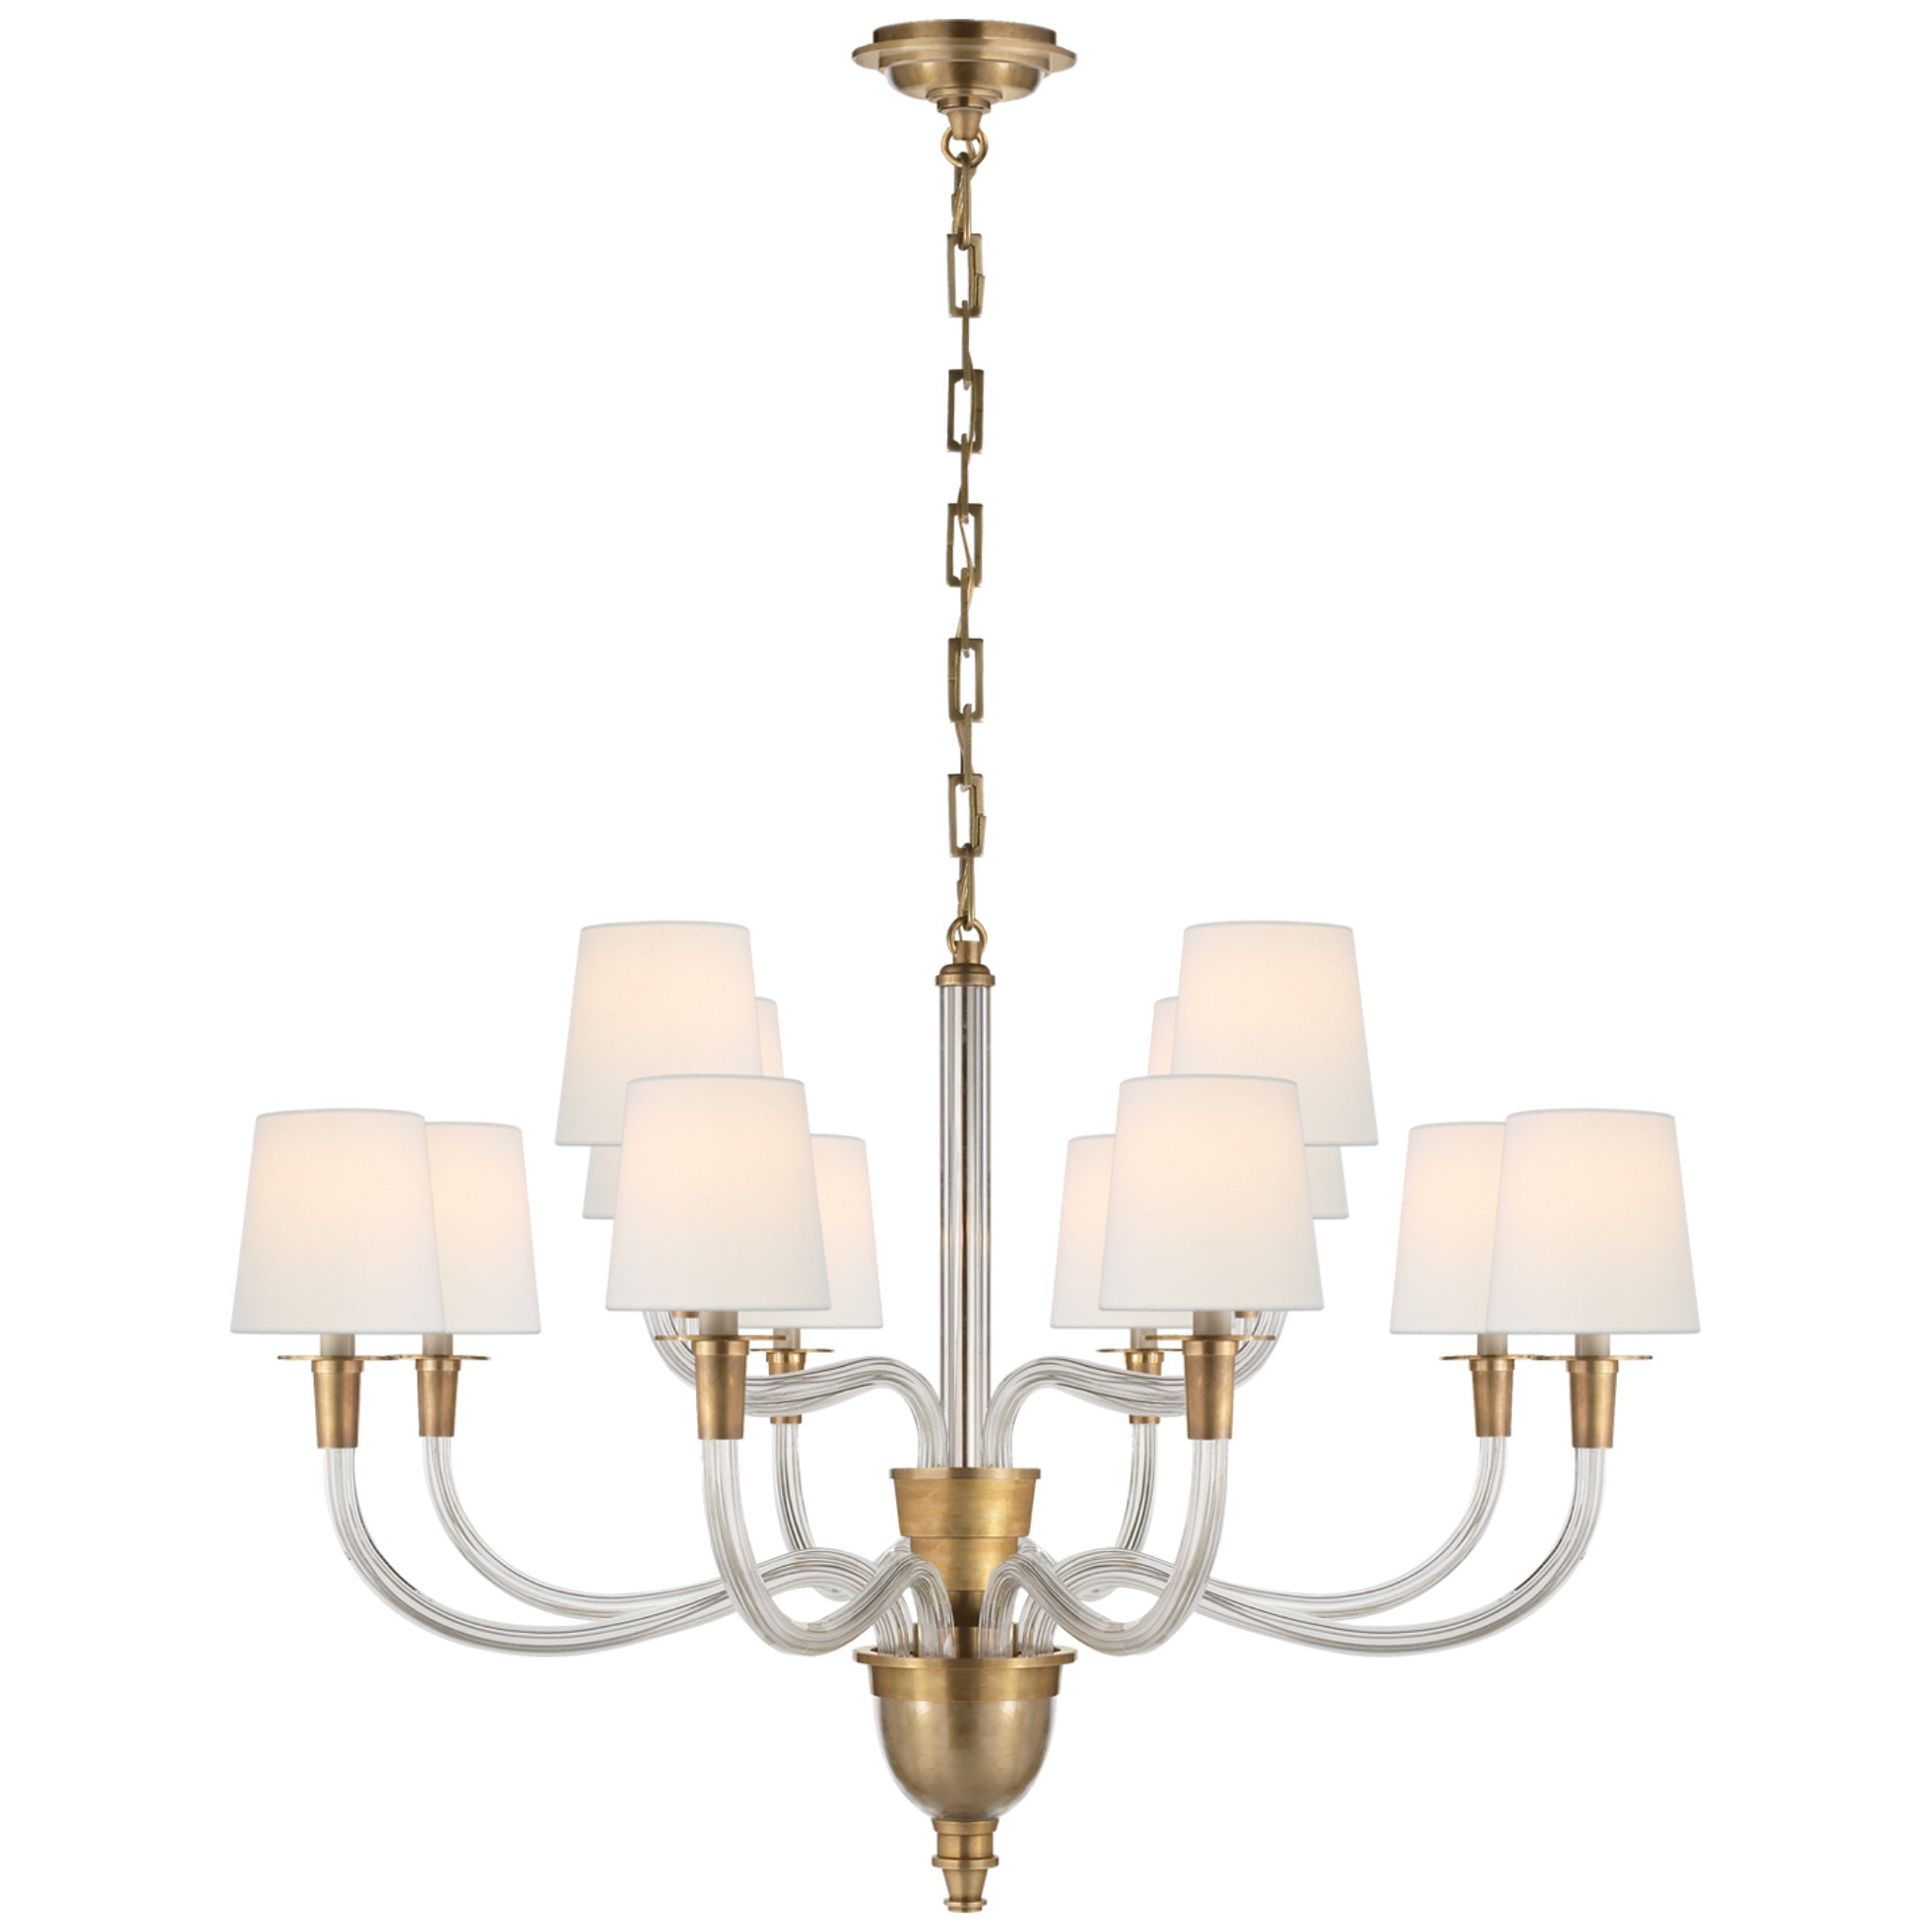 Thomas O'Brien Vivian Large Two-Tier Chandelier in Hand-Rubbed Antique Brass with Linen Shades